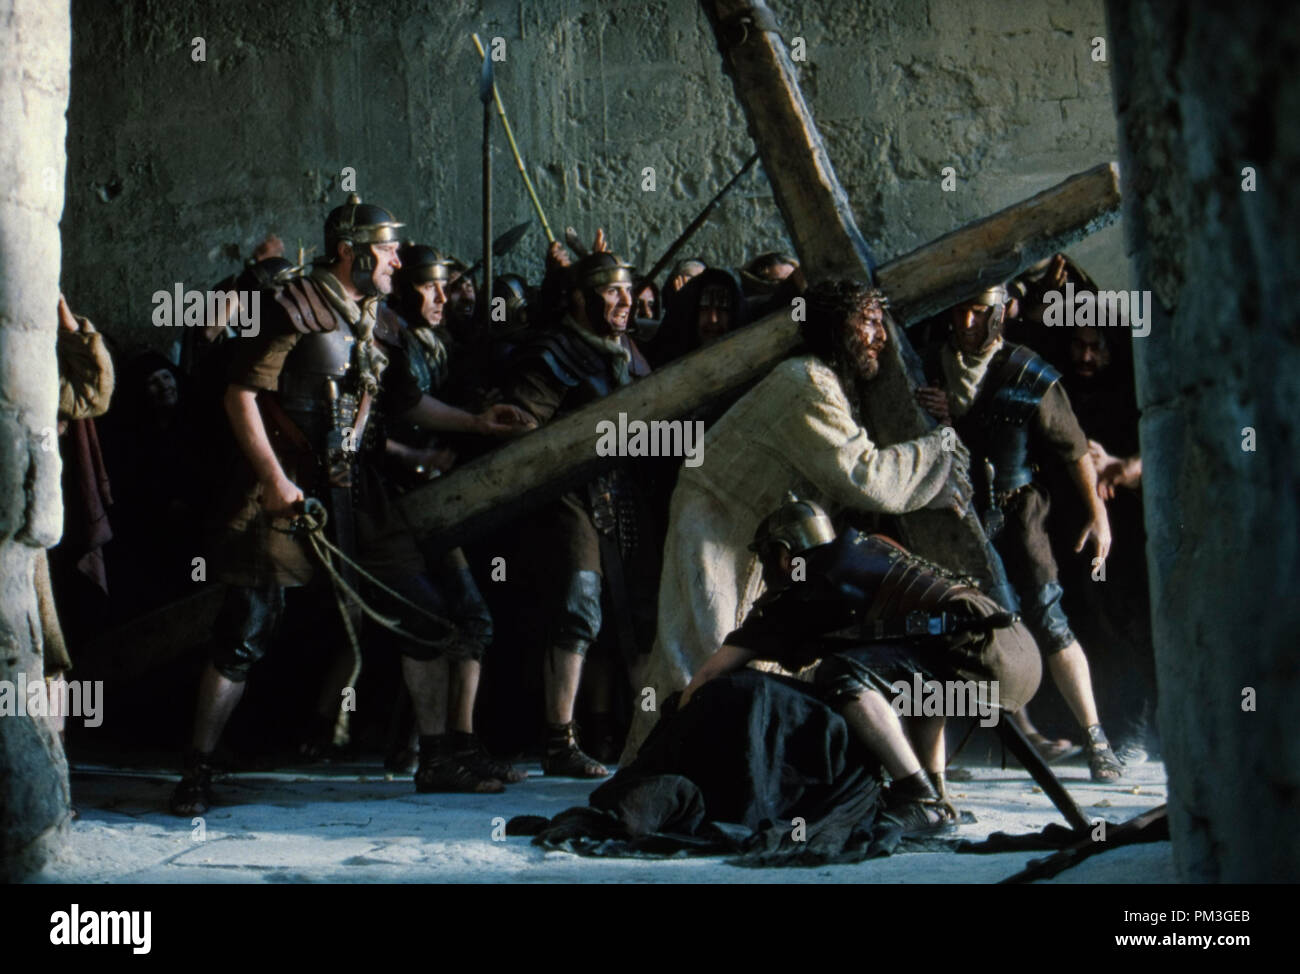 Film Still from 'The Passion of the Christ' James Caviezel Photo Credit: Philippe Antonello © 2004 Icon File Reference # 307351079THA  For Editorial Use Only -  All Rights Reserved Stock Photo